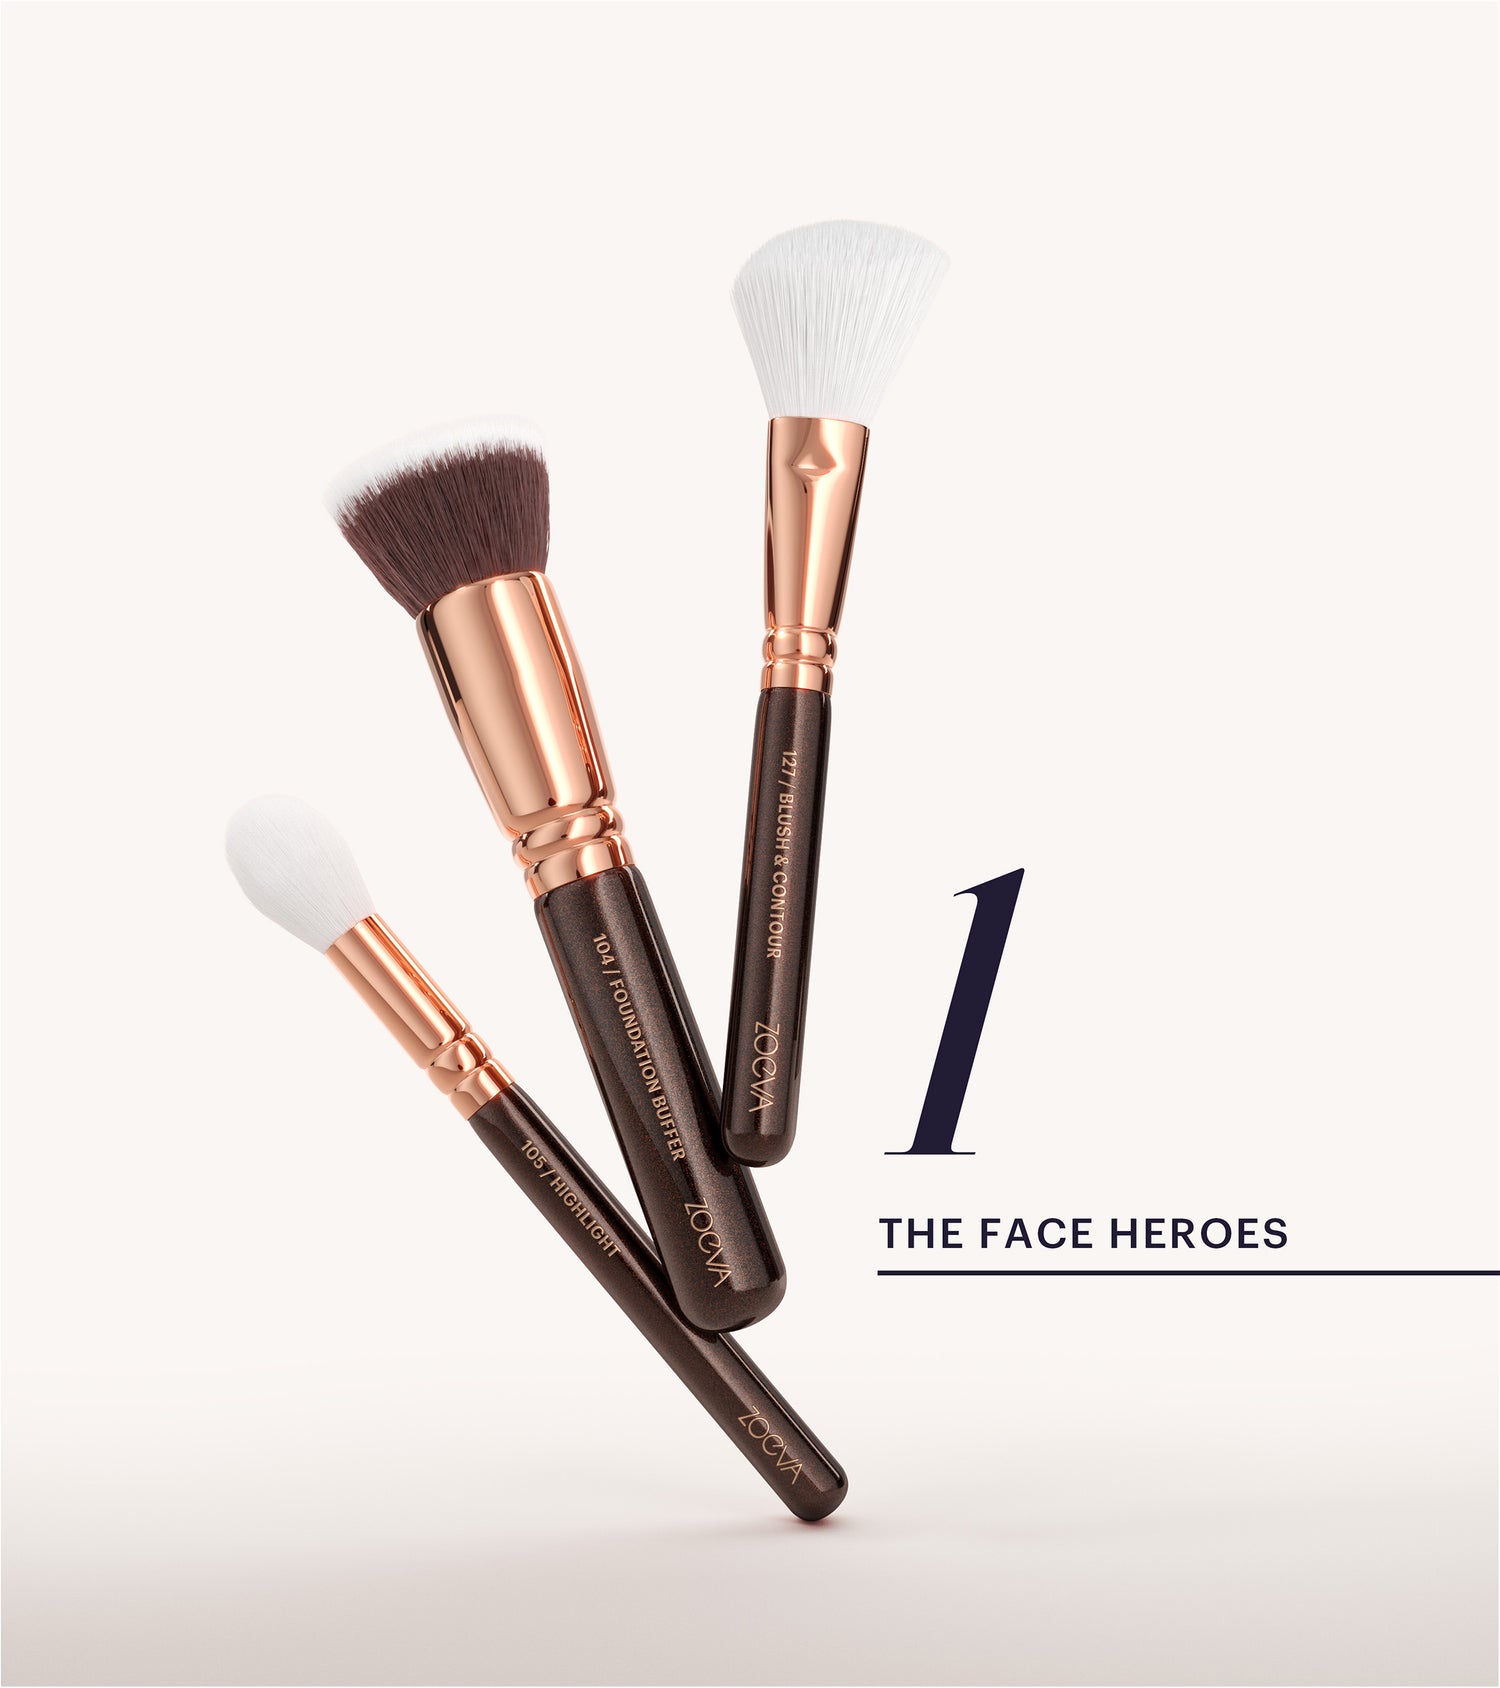 The Complete Brush Set (Rosé Golden Edition) Main Image featured